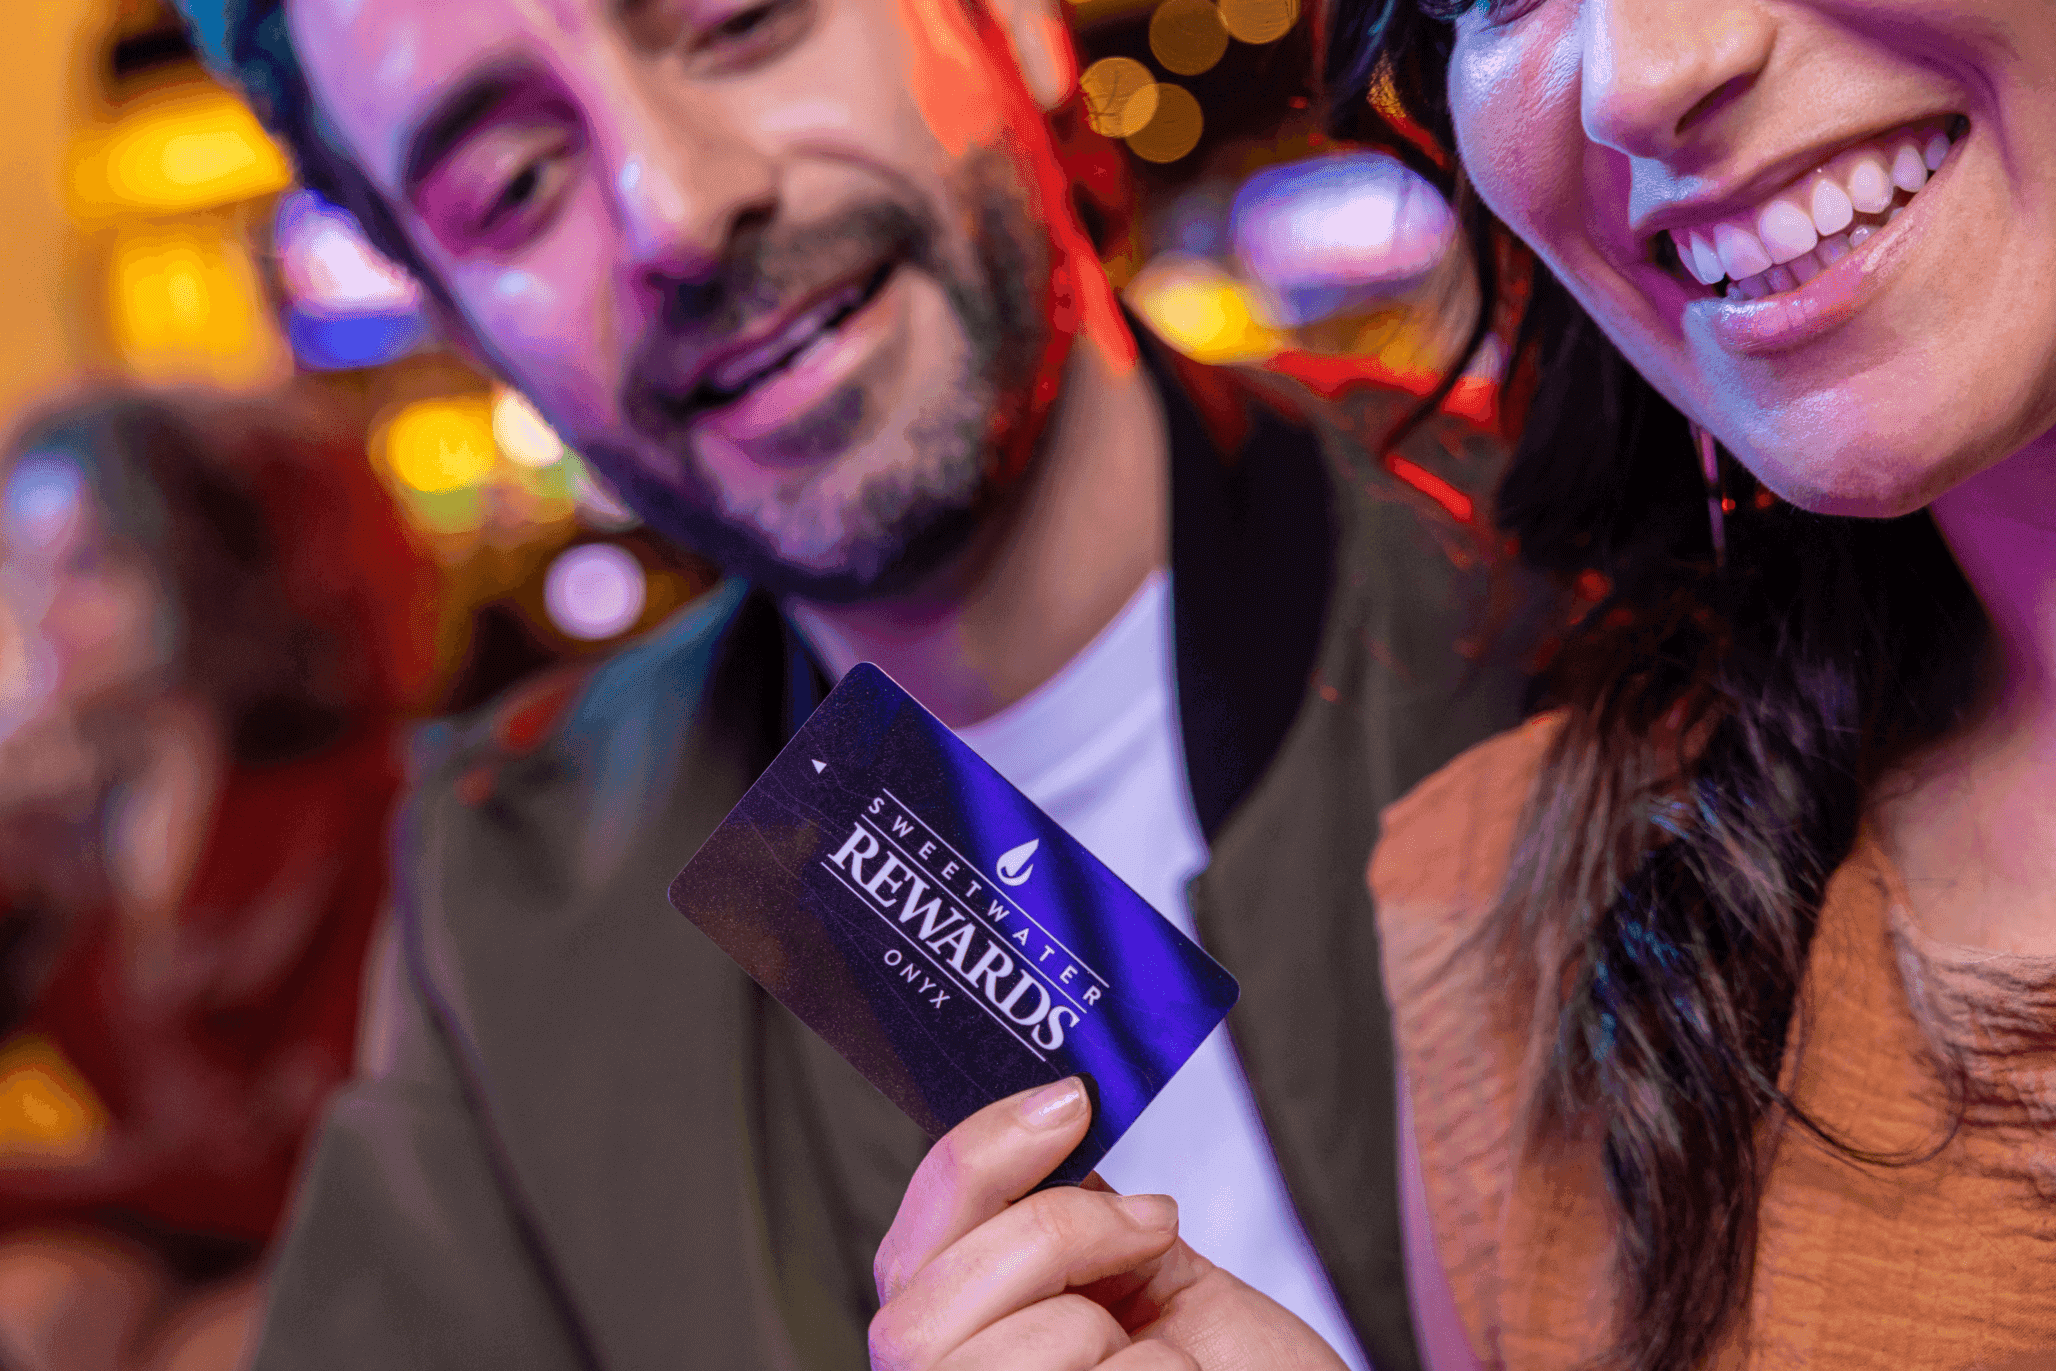 A smiling woman and a man displaying a Sweetwater Rewards Onyx membership card at a lively venue, symbolizing exclusive customer benefits.